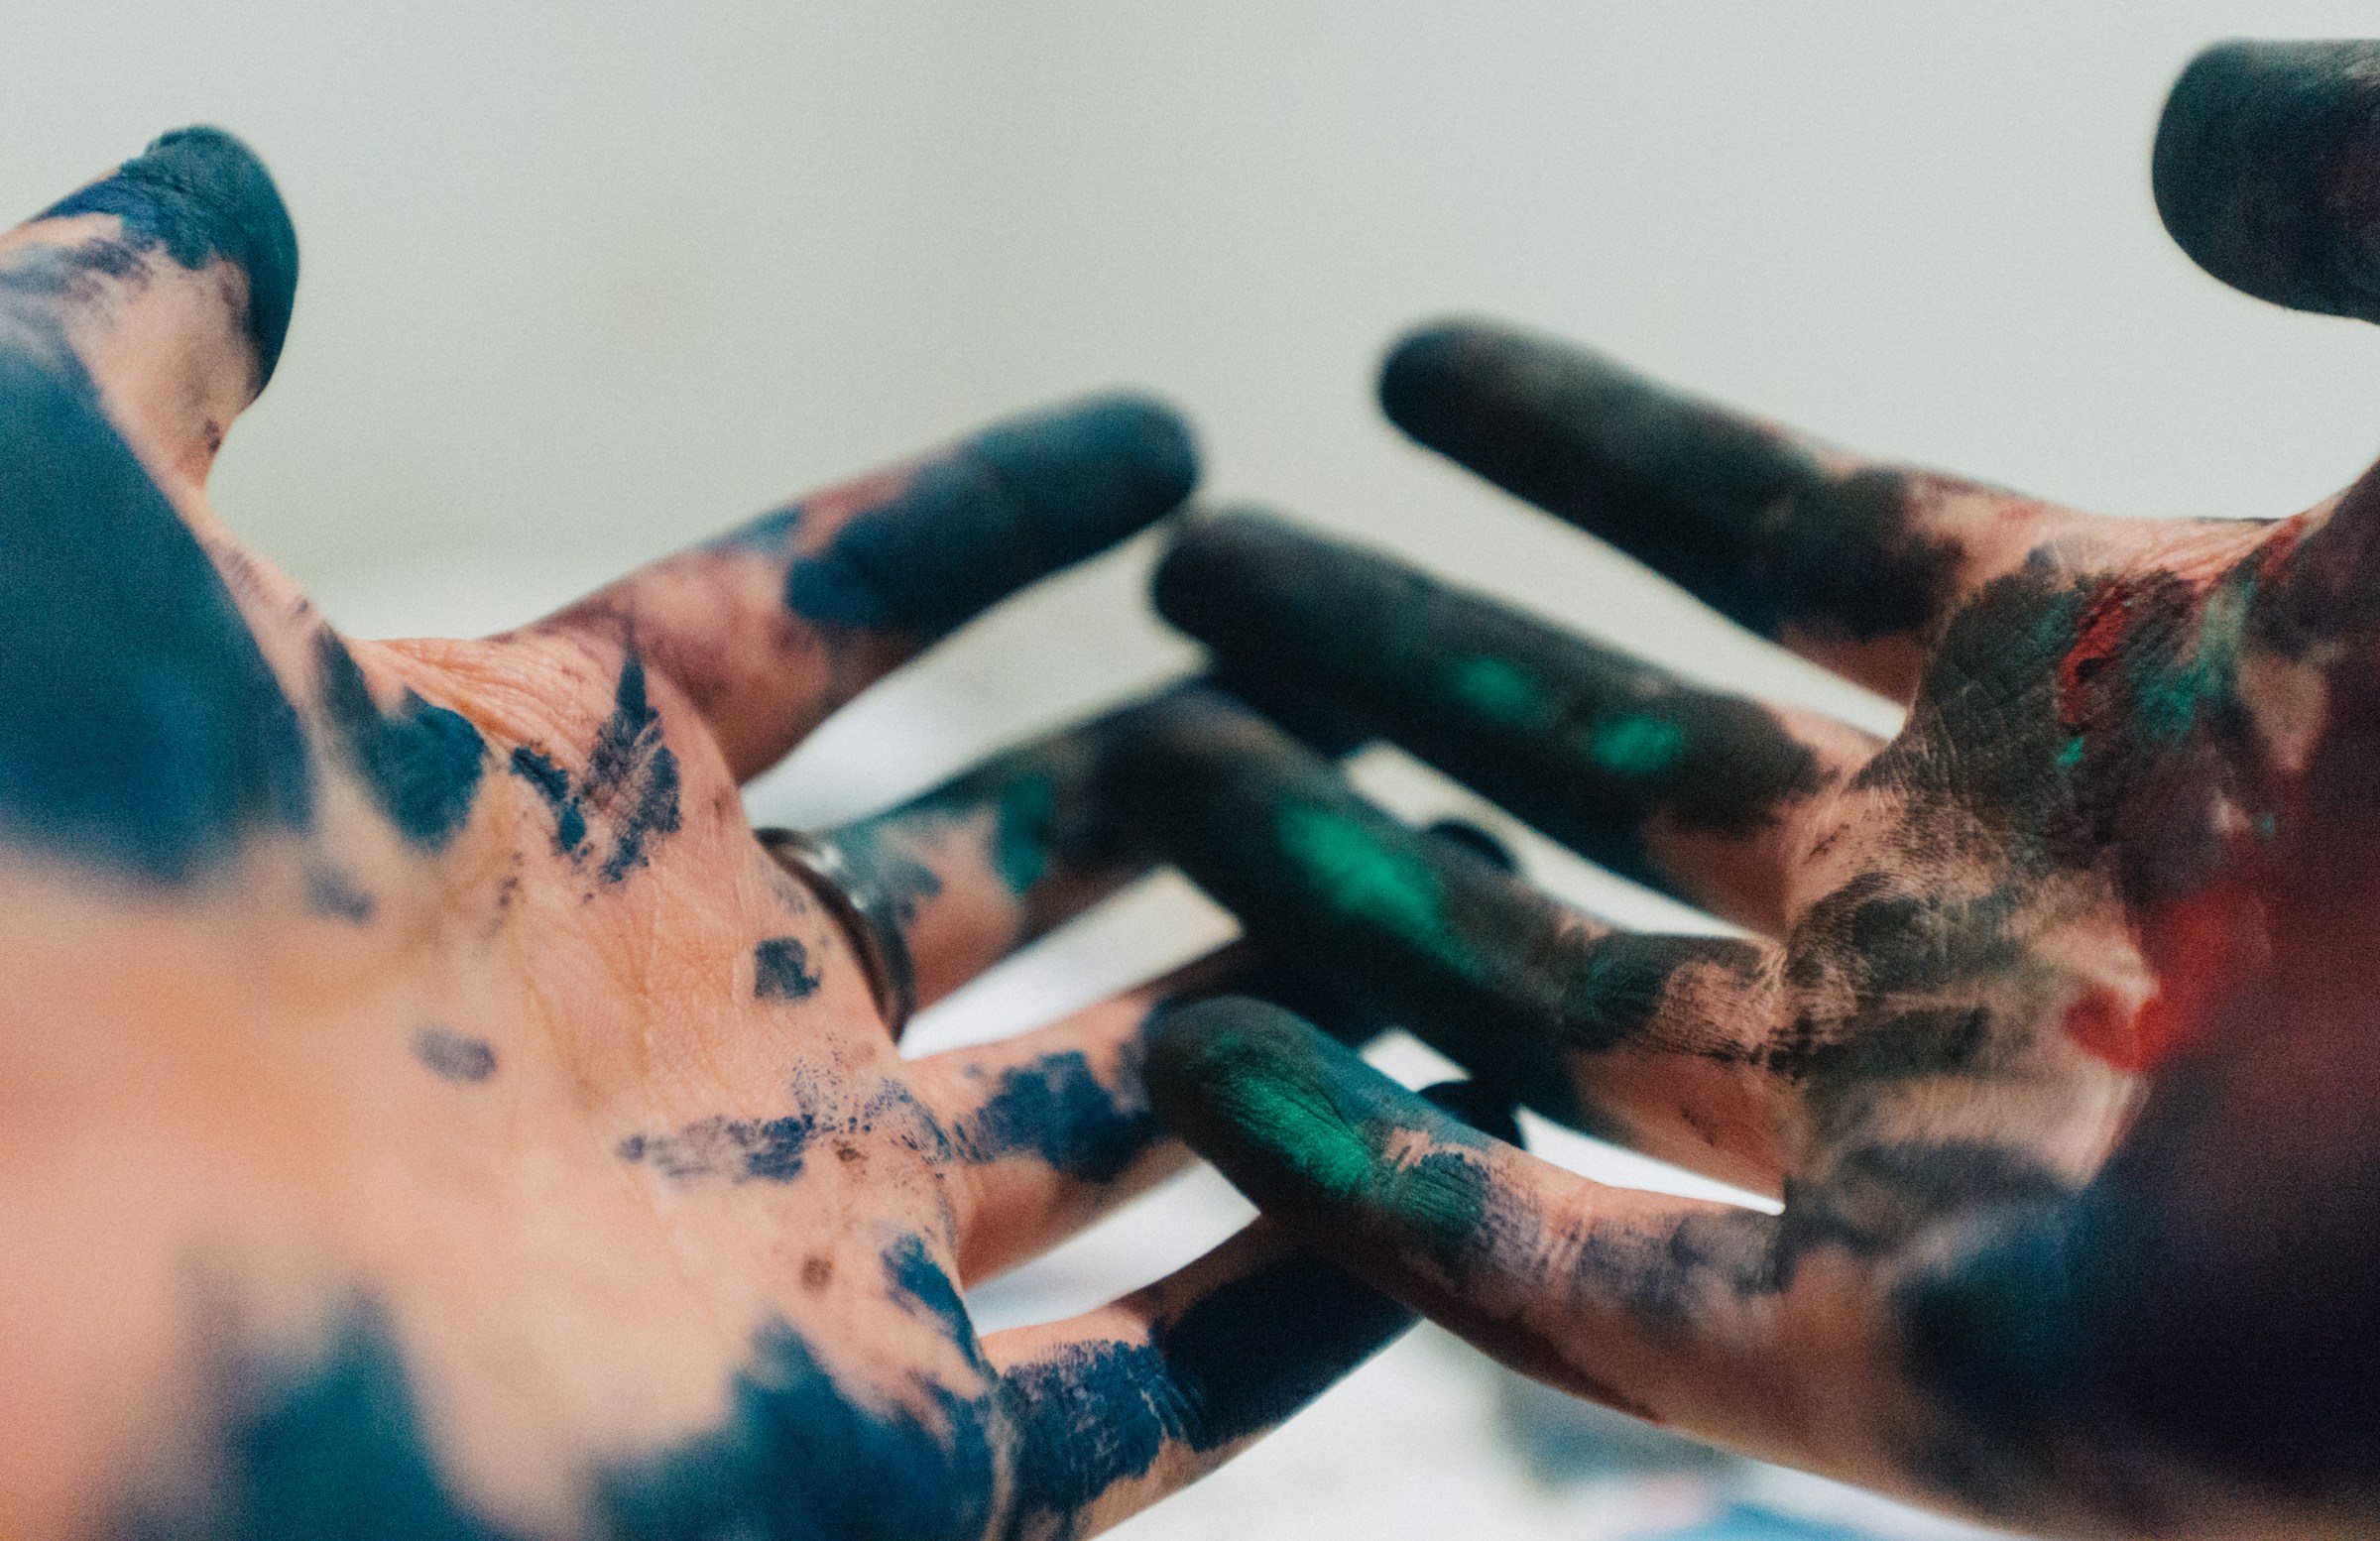 picture of adults' hands covered in green paint. Appear to be from finger painting